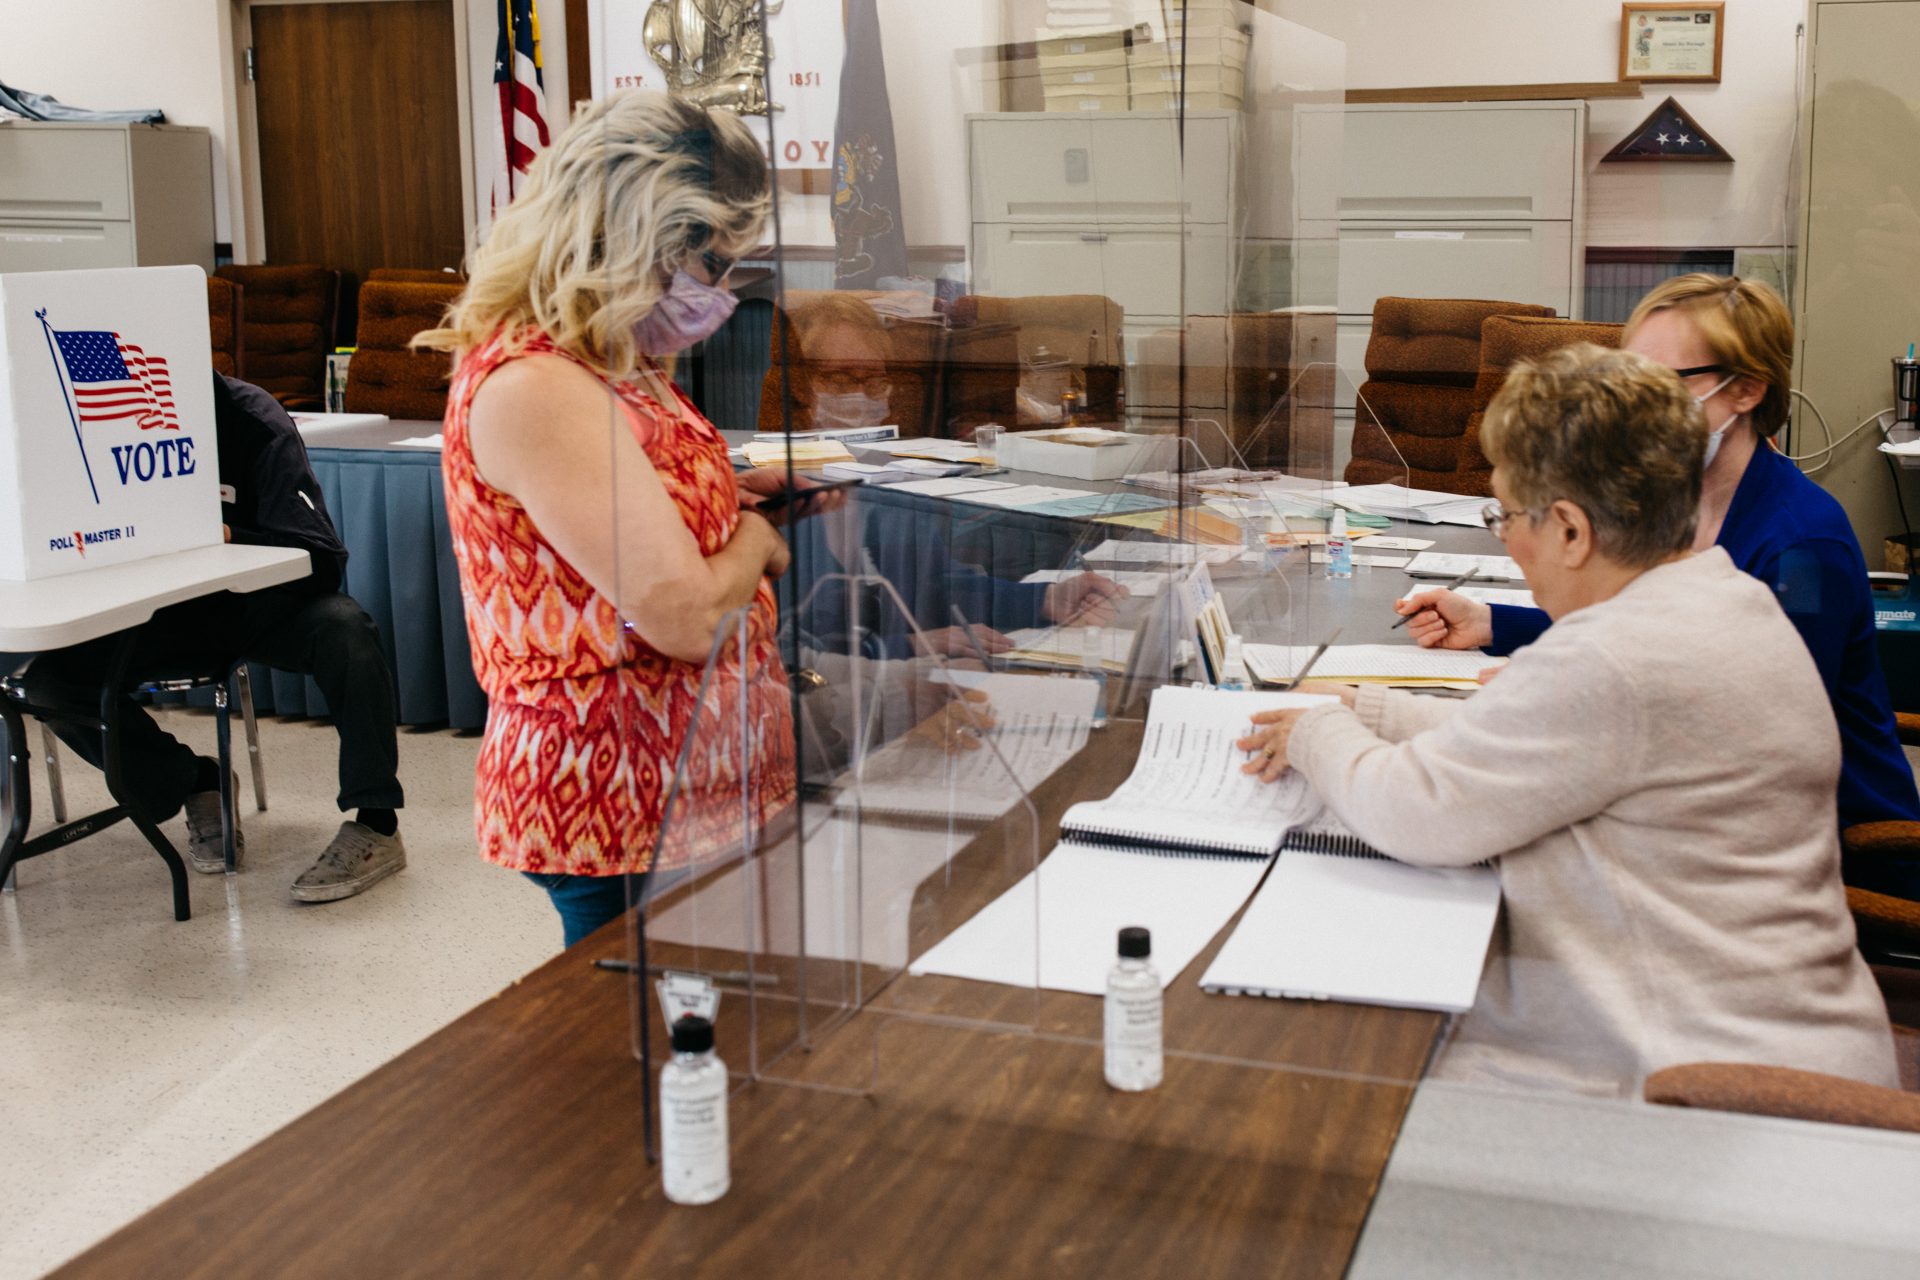 A voter checks in at the Mount Joy Borough Municipal Office on June 2, 2020. Many polling places were equipped with plexiglass screens to minimize the chance of spreading coronavirus between poll workers and voters.